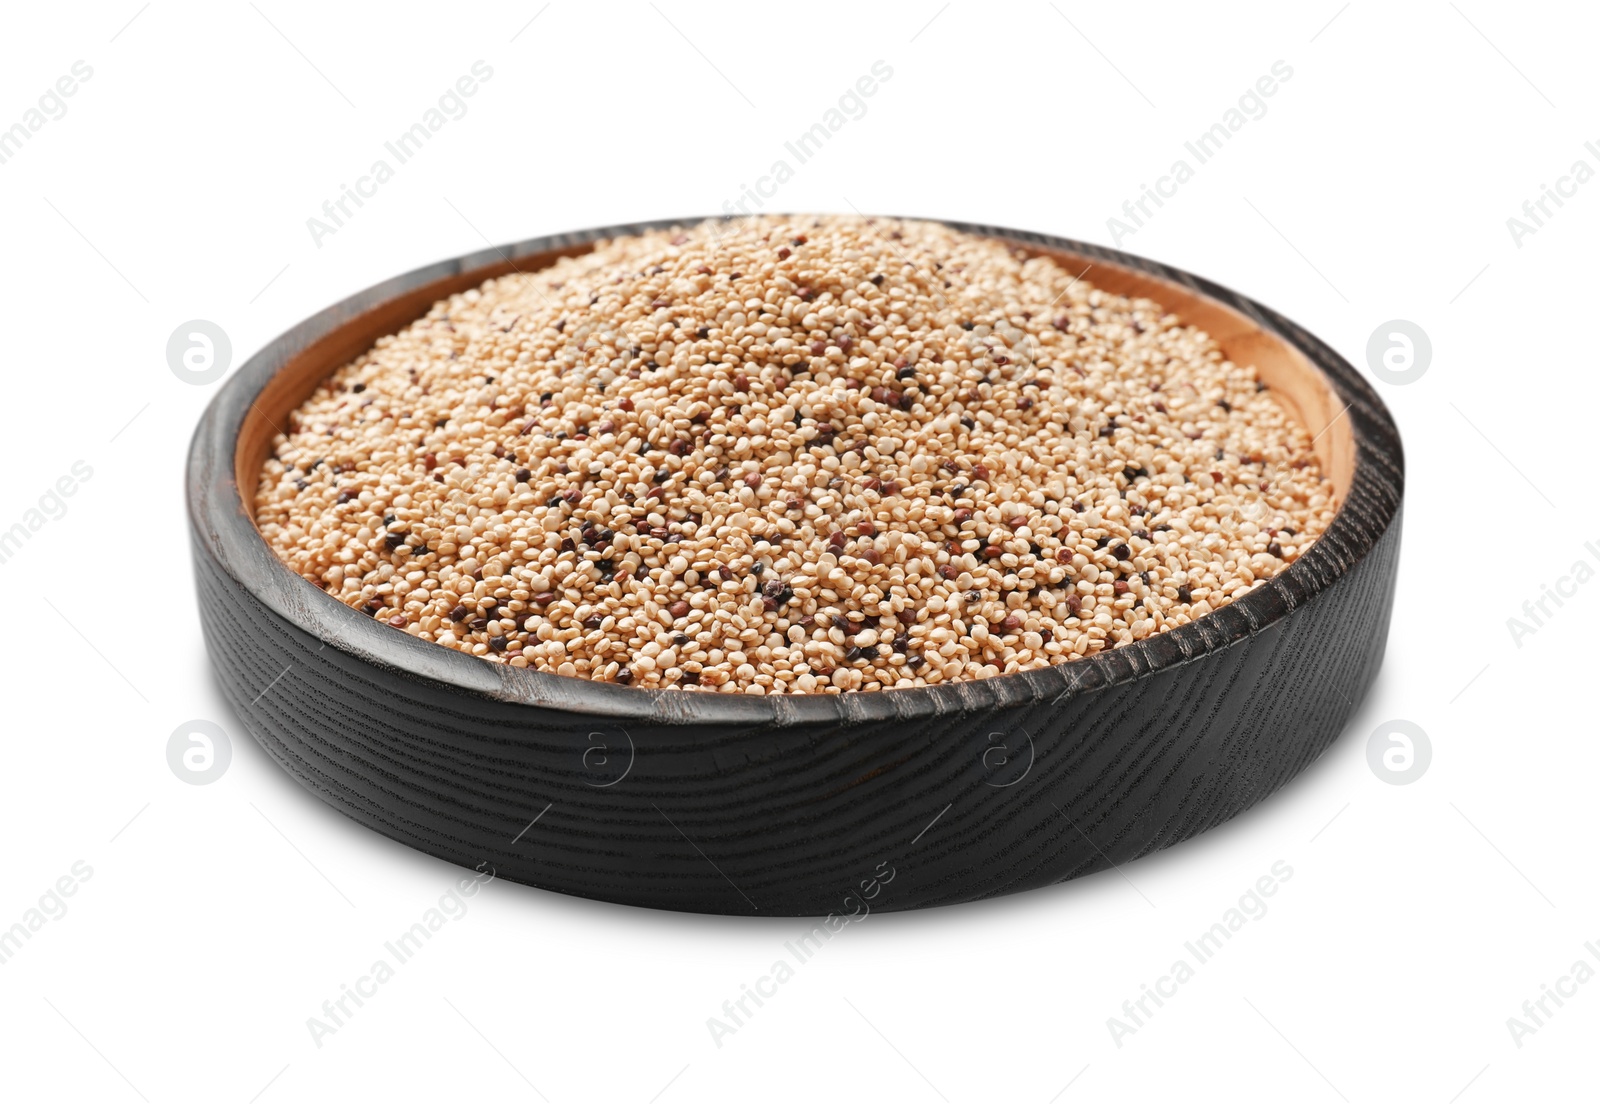 Photo of Raw quinoa seeds in bowl isolated on white